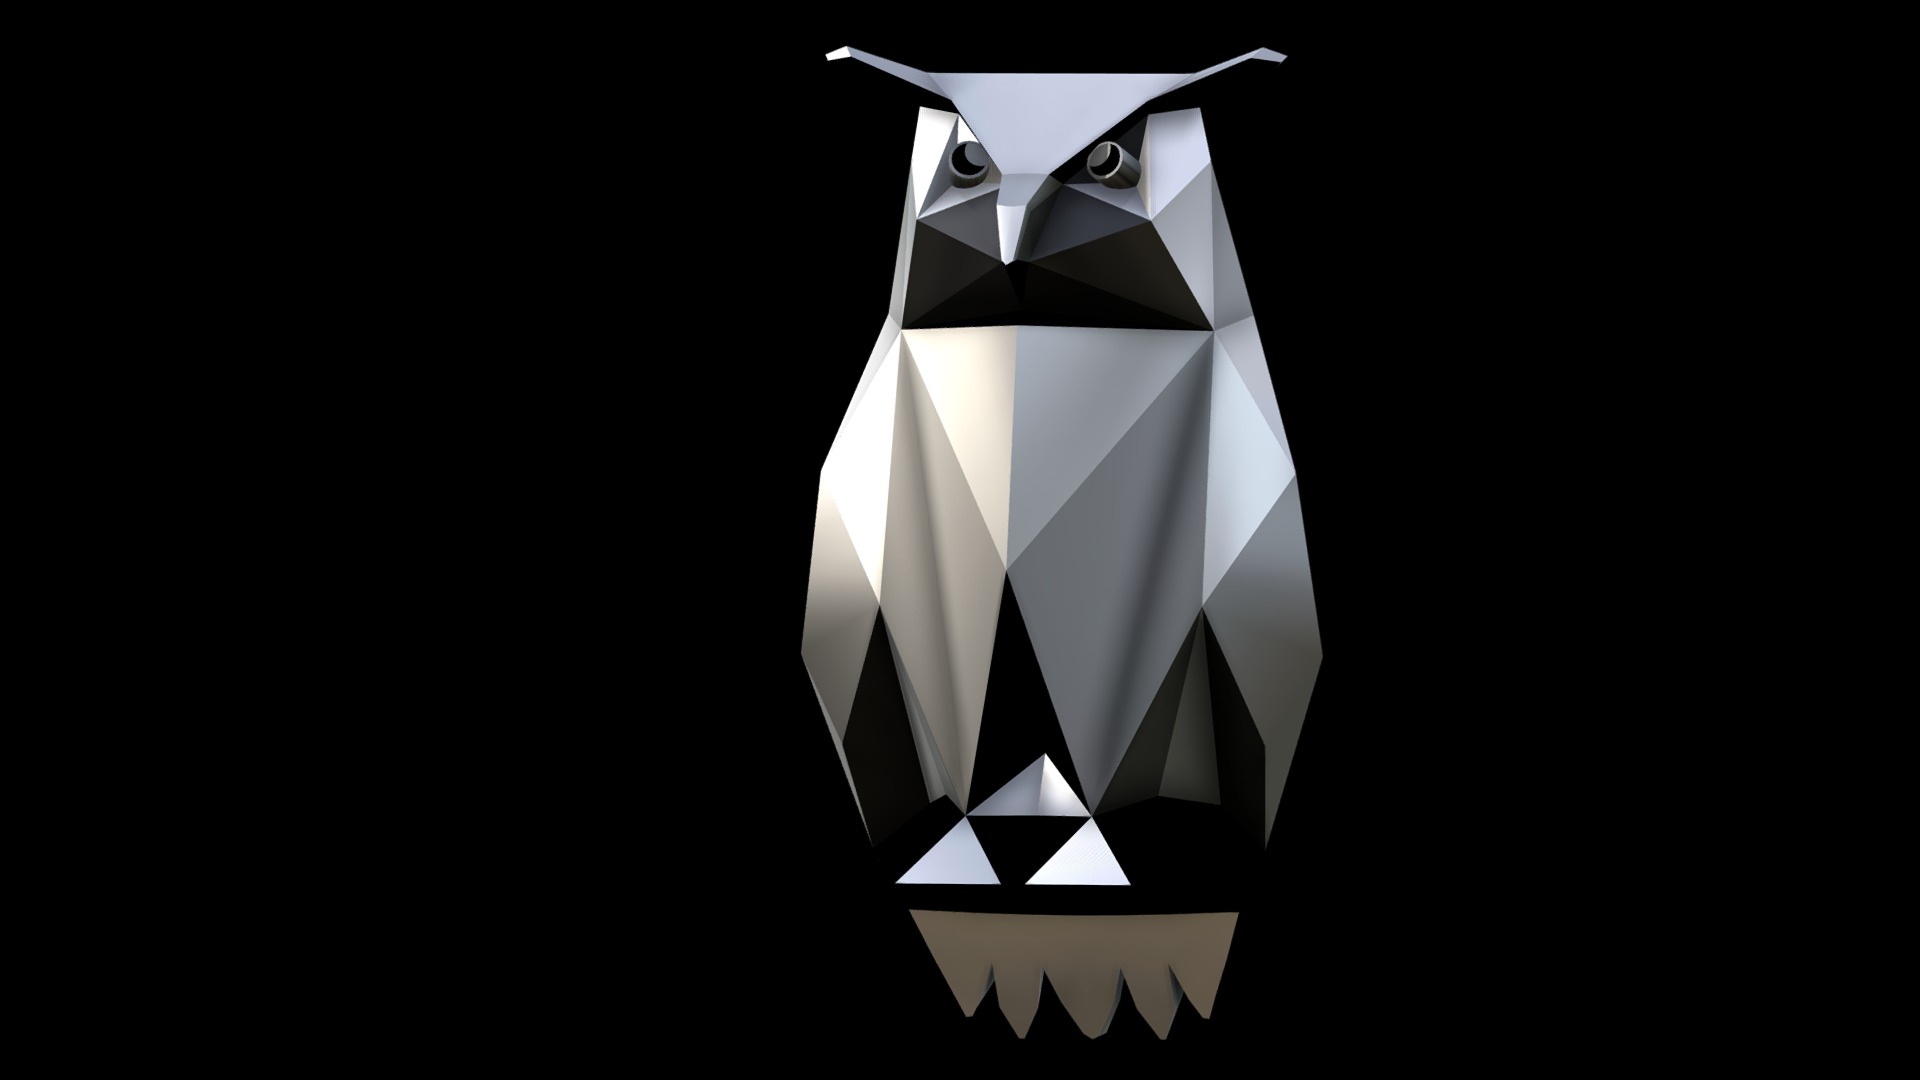 3D model Tesla Owl - This is a 3D model of the Tesla Owl. The 3D model is about a black and white logo.